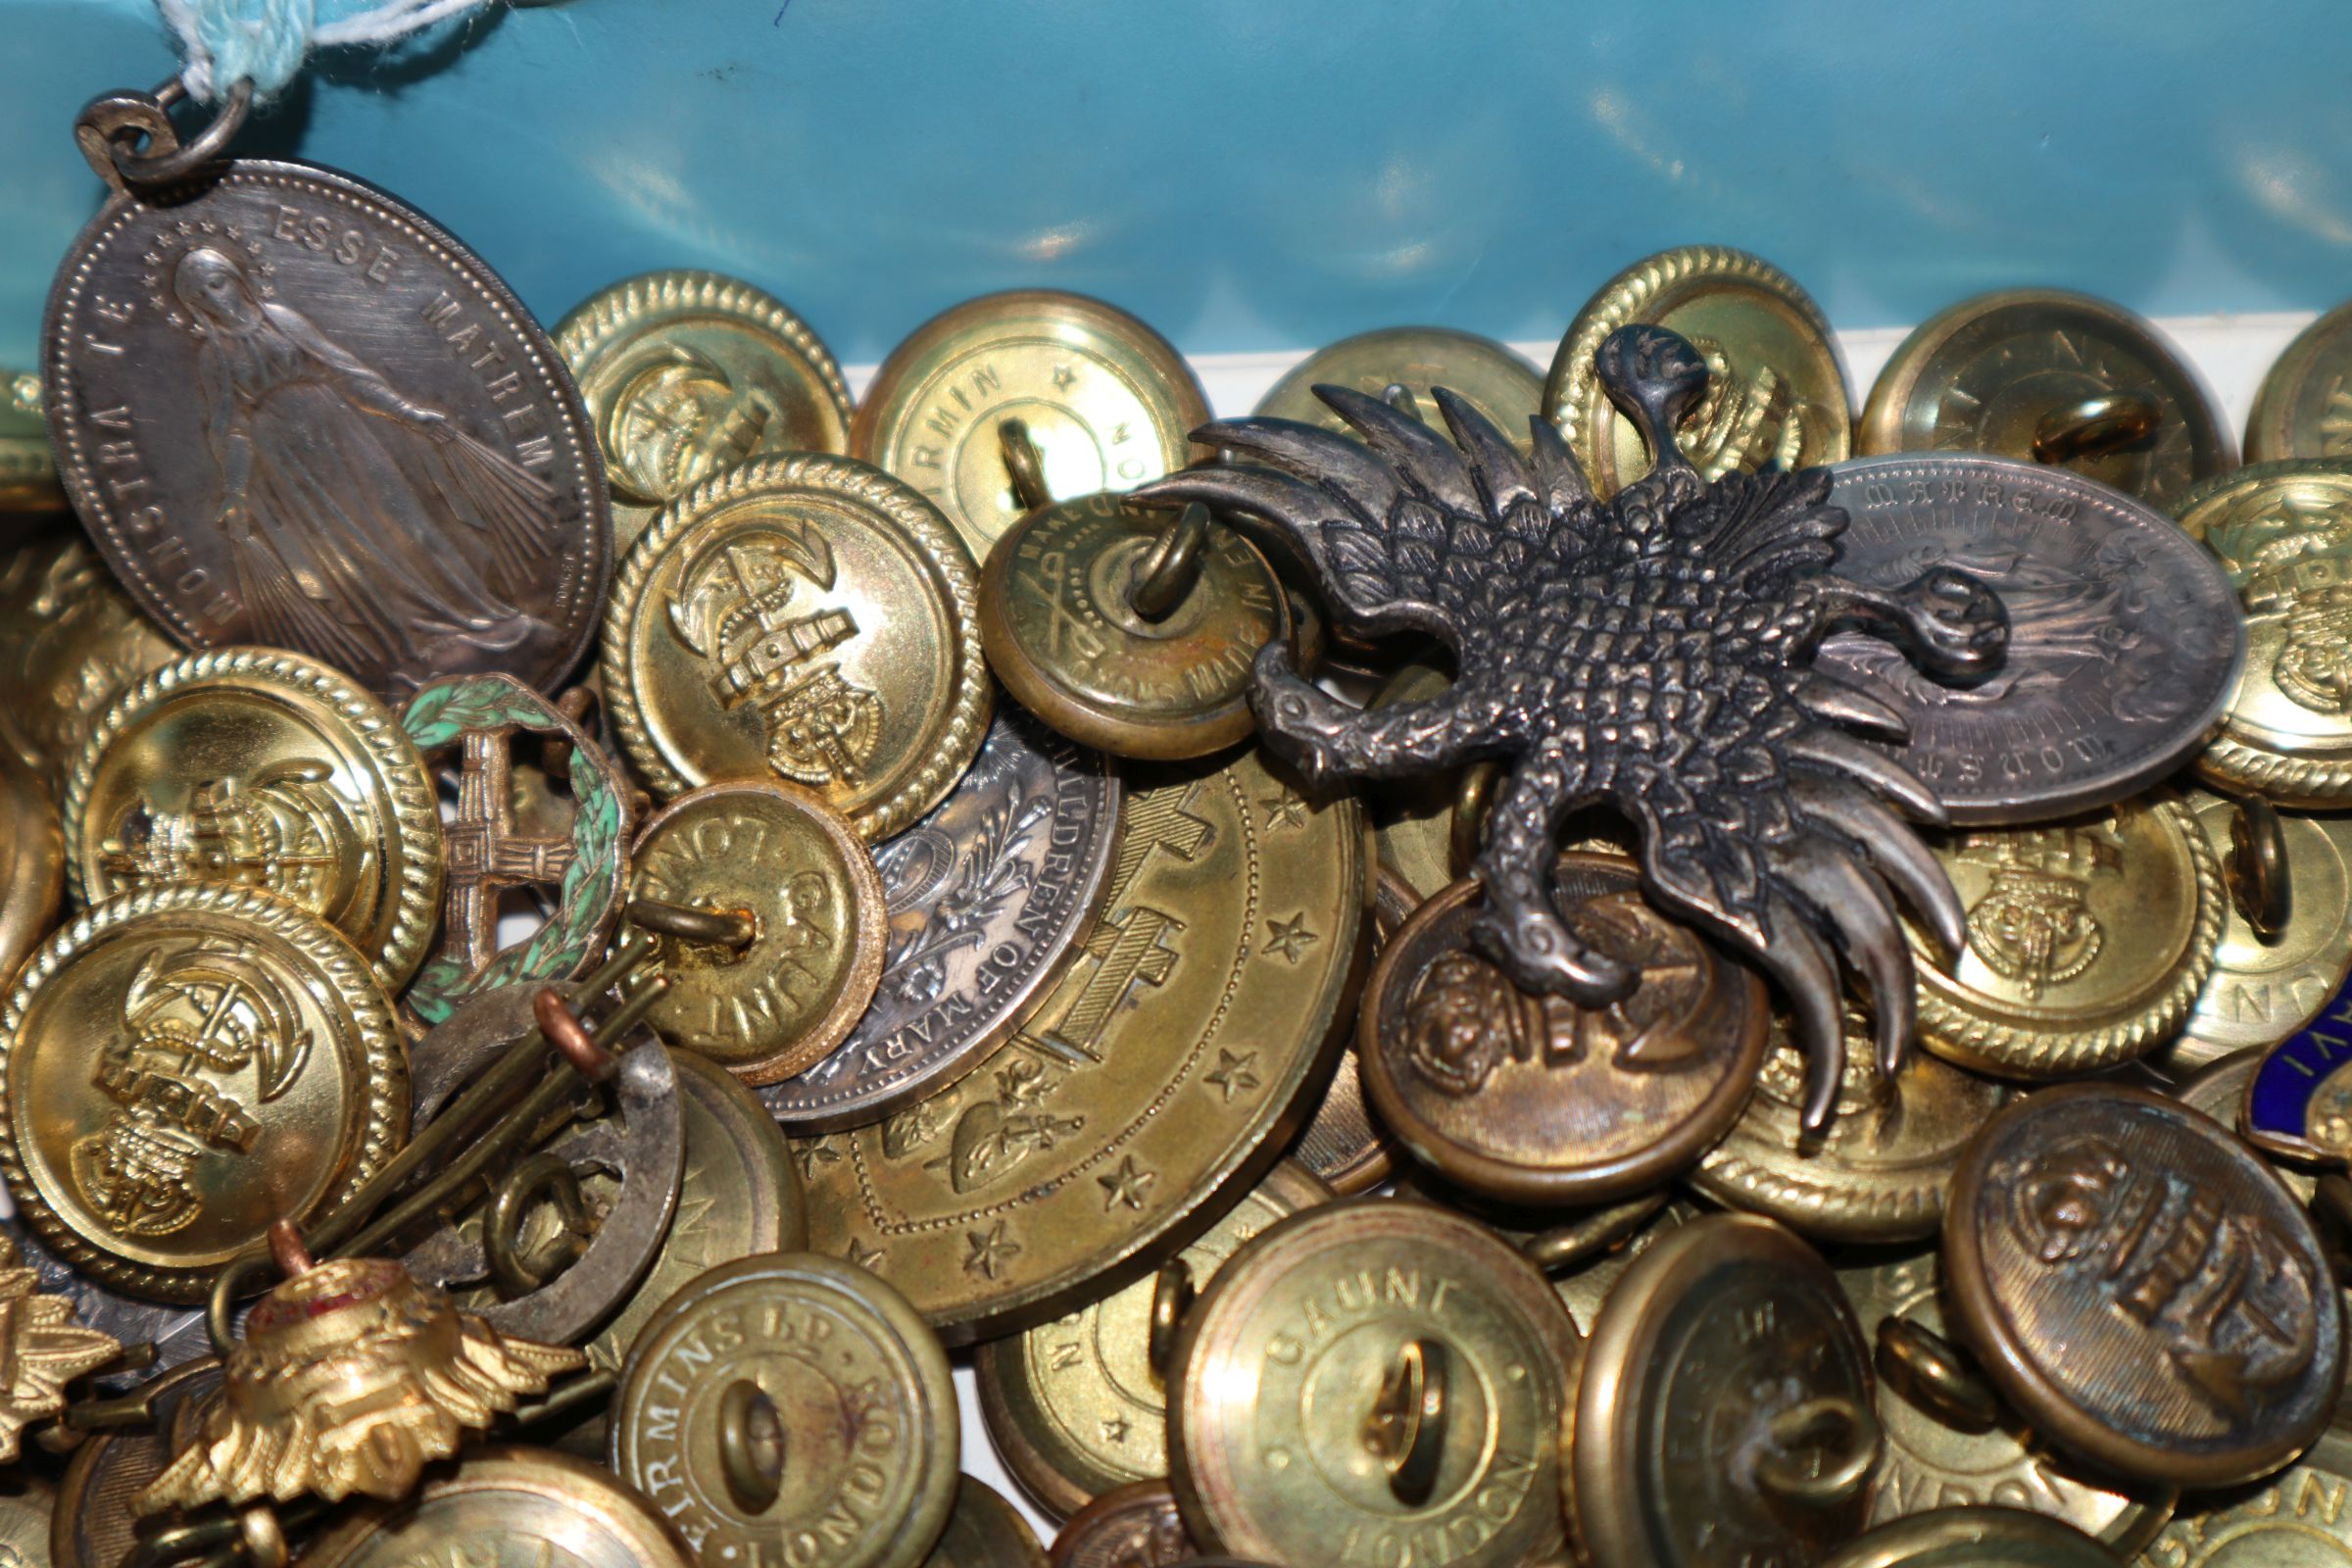 Assorted medallions and military buttons etc. - Image 9 of 12